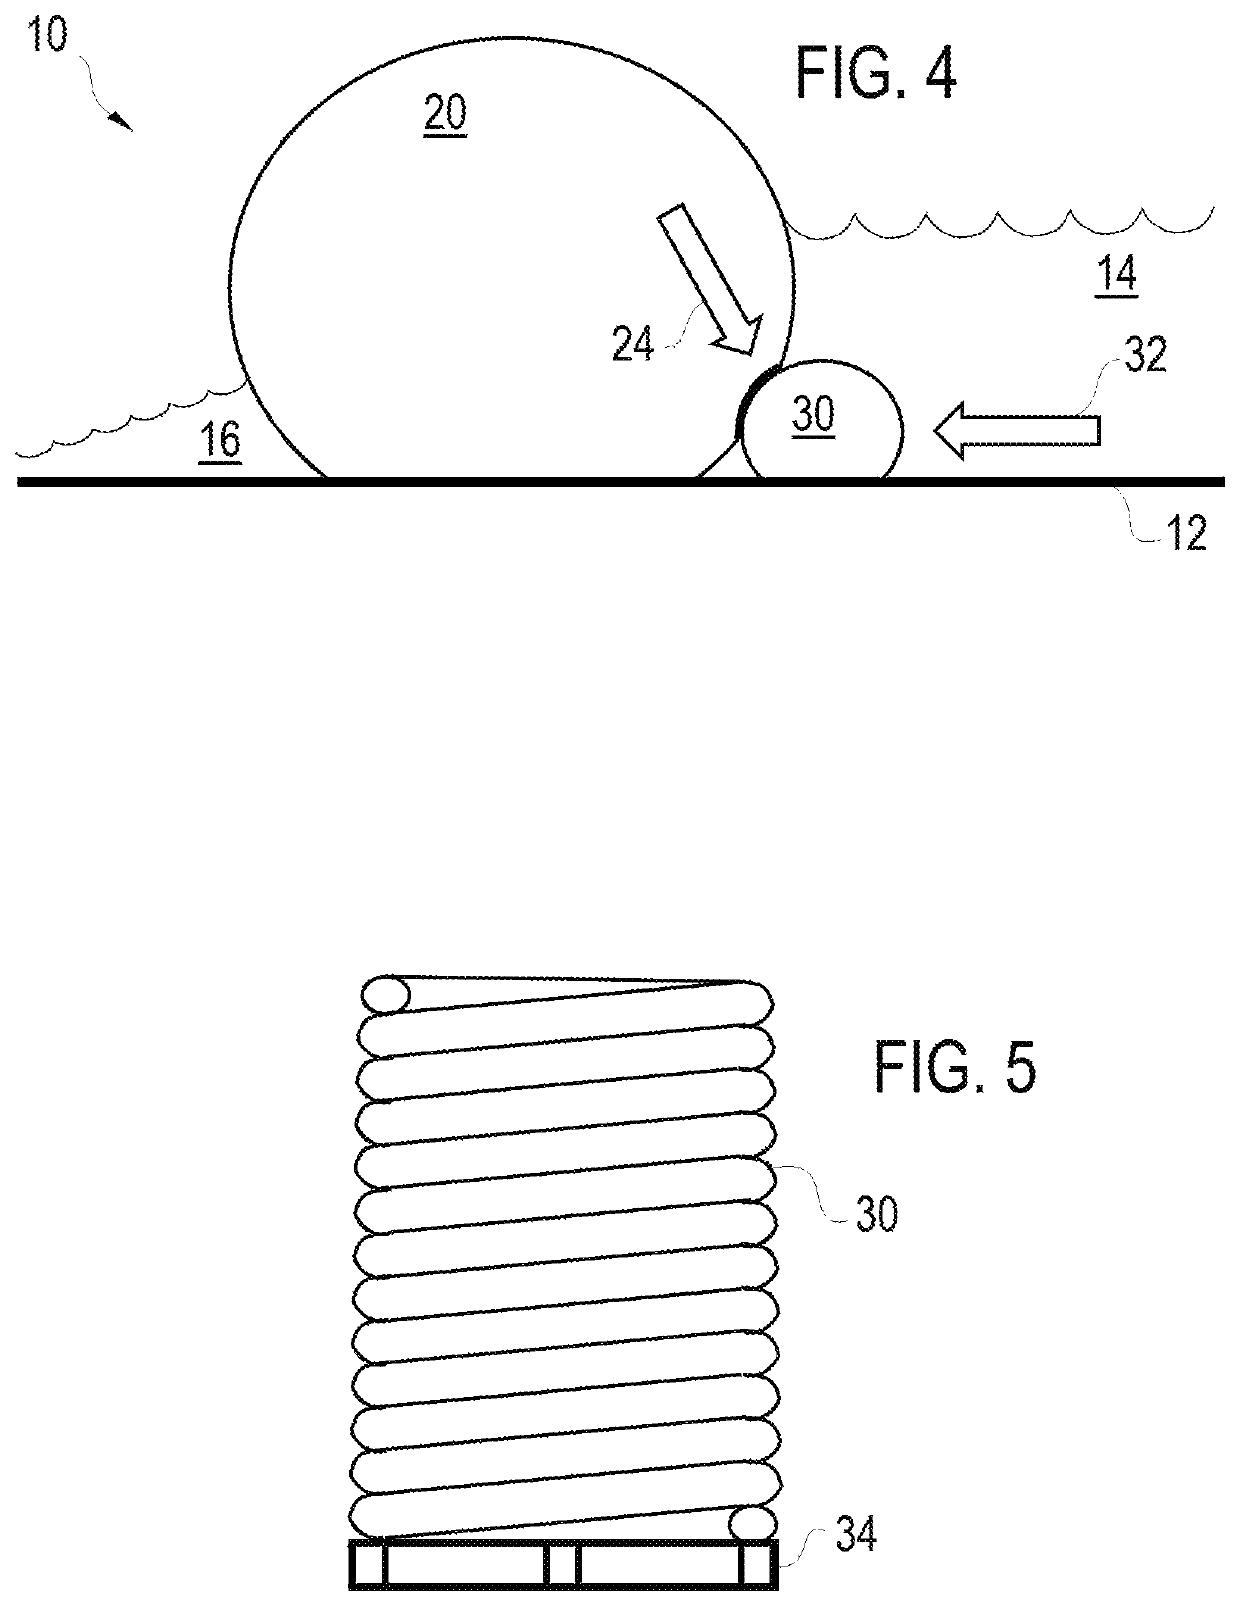 Secondary tubular composite filter sock seam filling device and method of using same and composite filter sock assembly incorporating a seam filling device